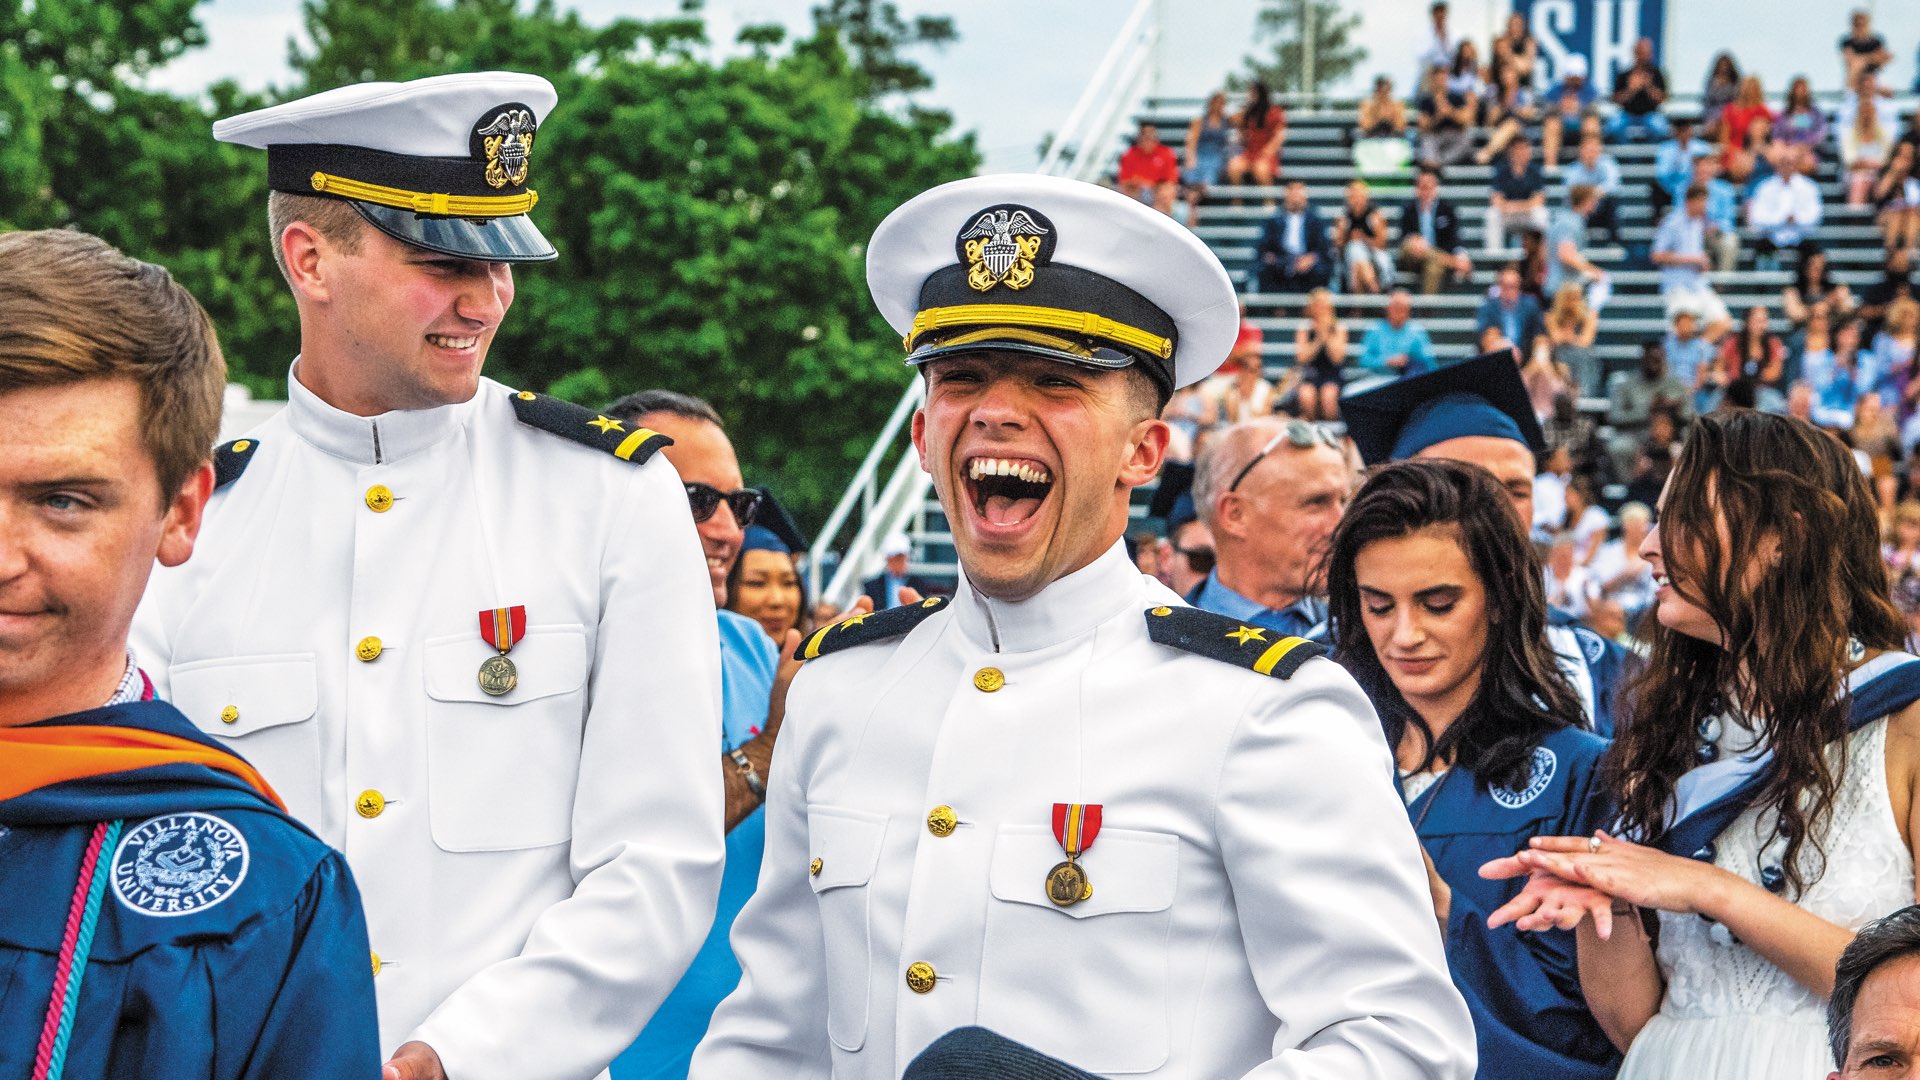 Two graduates wearing their Marine Dress Uniforms, laughing and smiling on Graduation Day